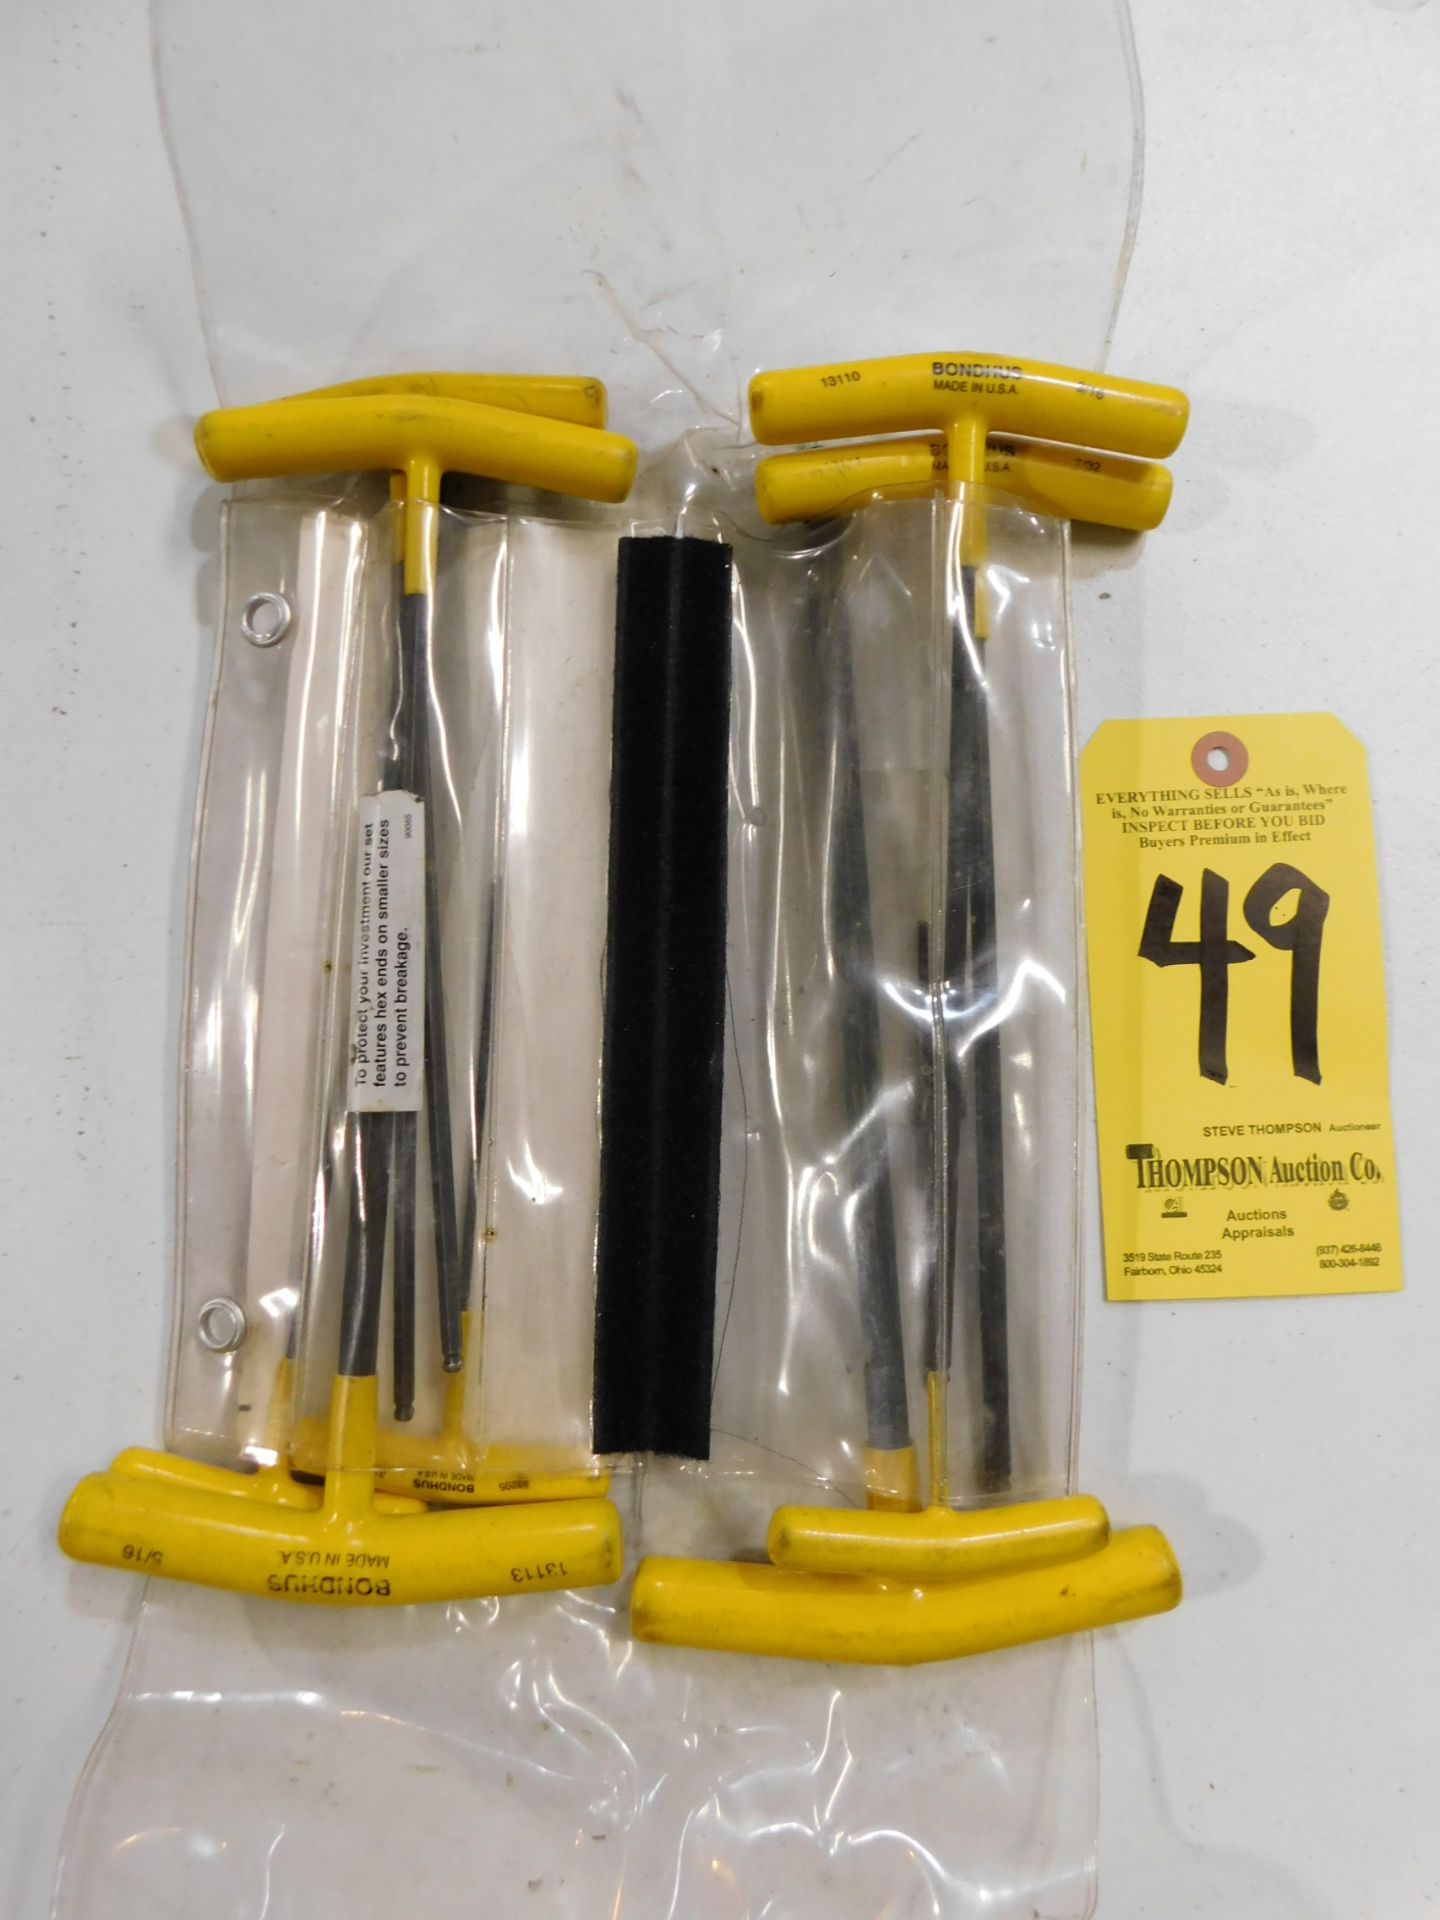 Bondhus T-Handle Hex Wrenches, Inch, Lot Location 3204 Olympia Dr. A, Lafayette, IN 47909